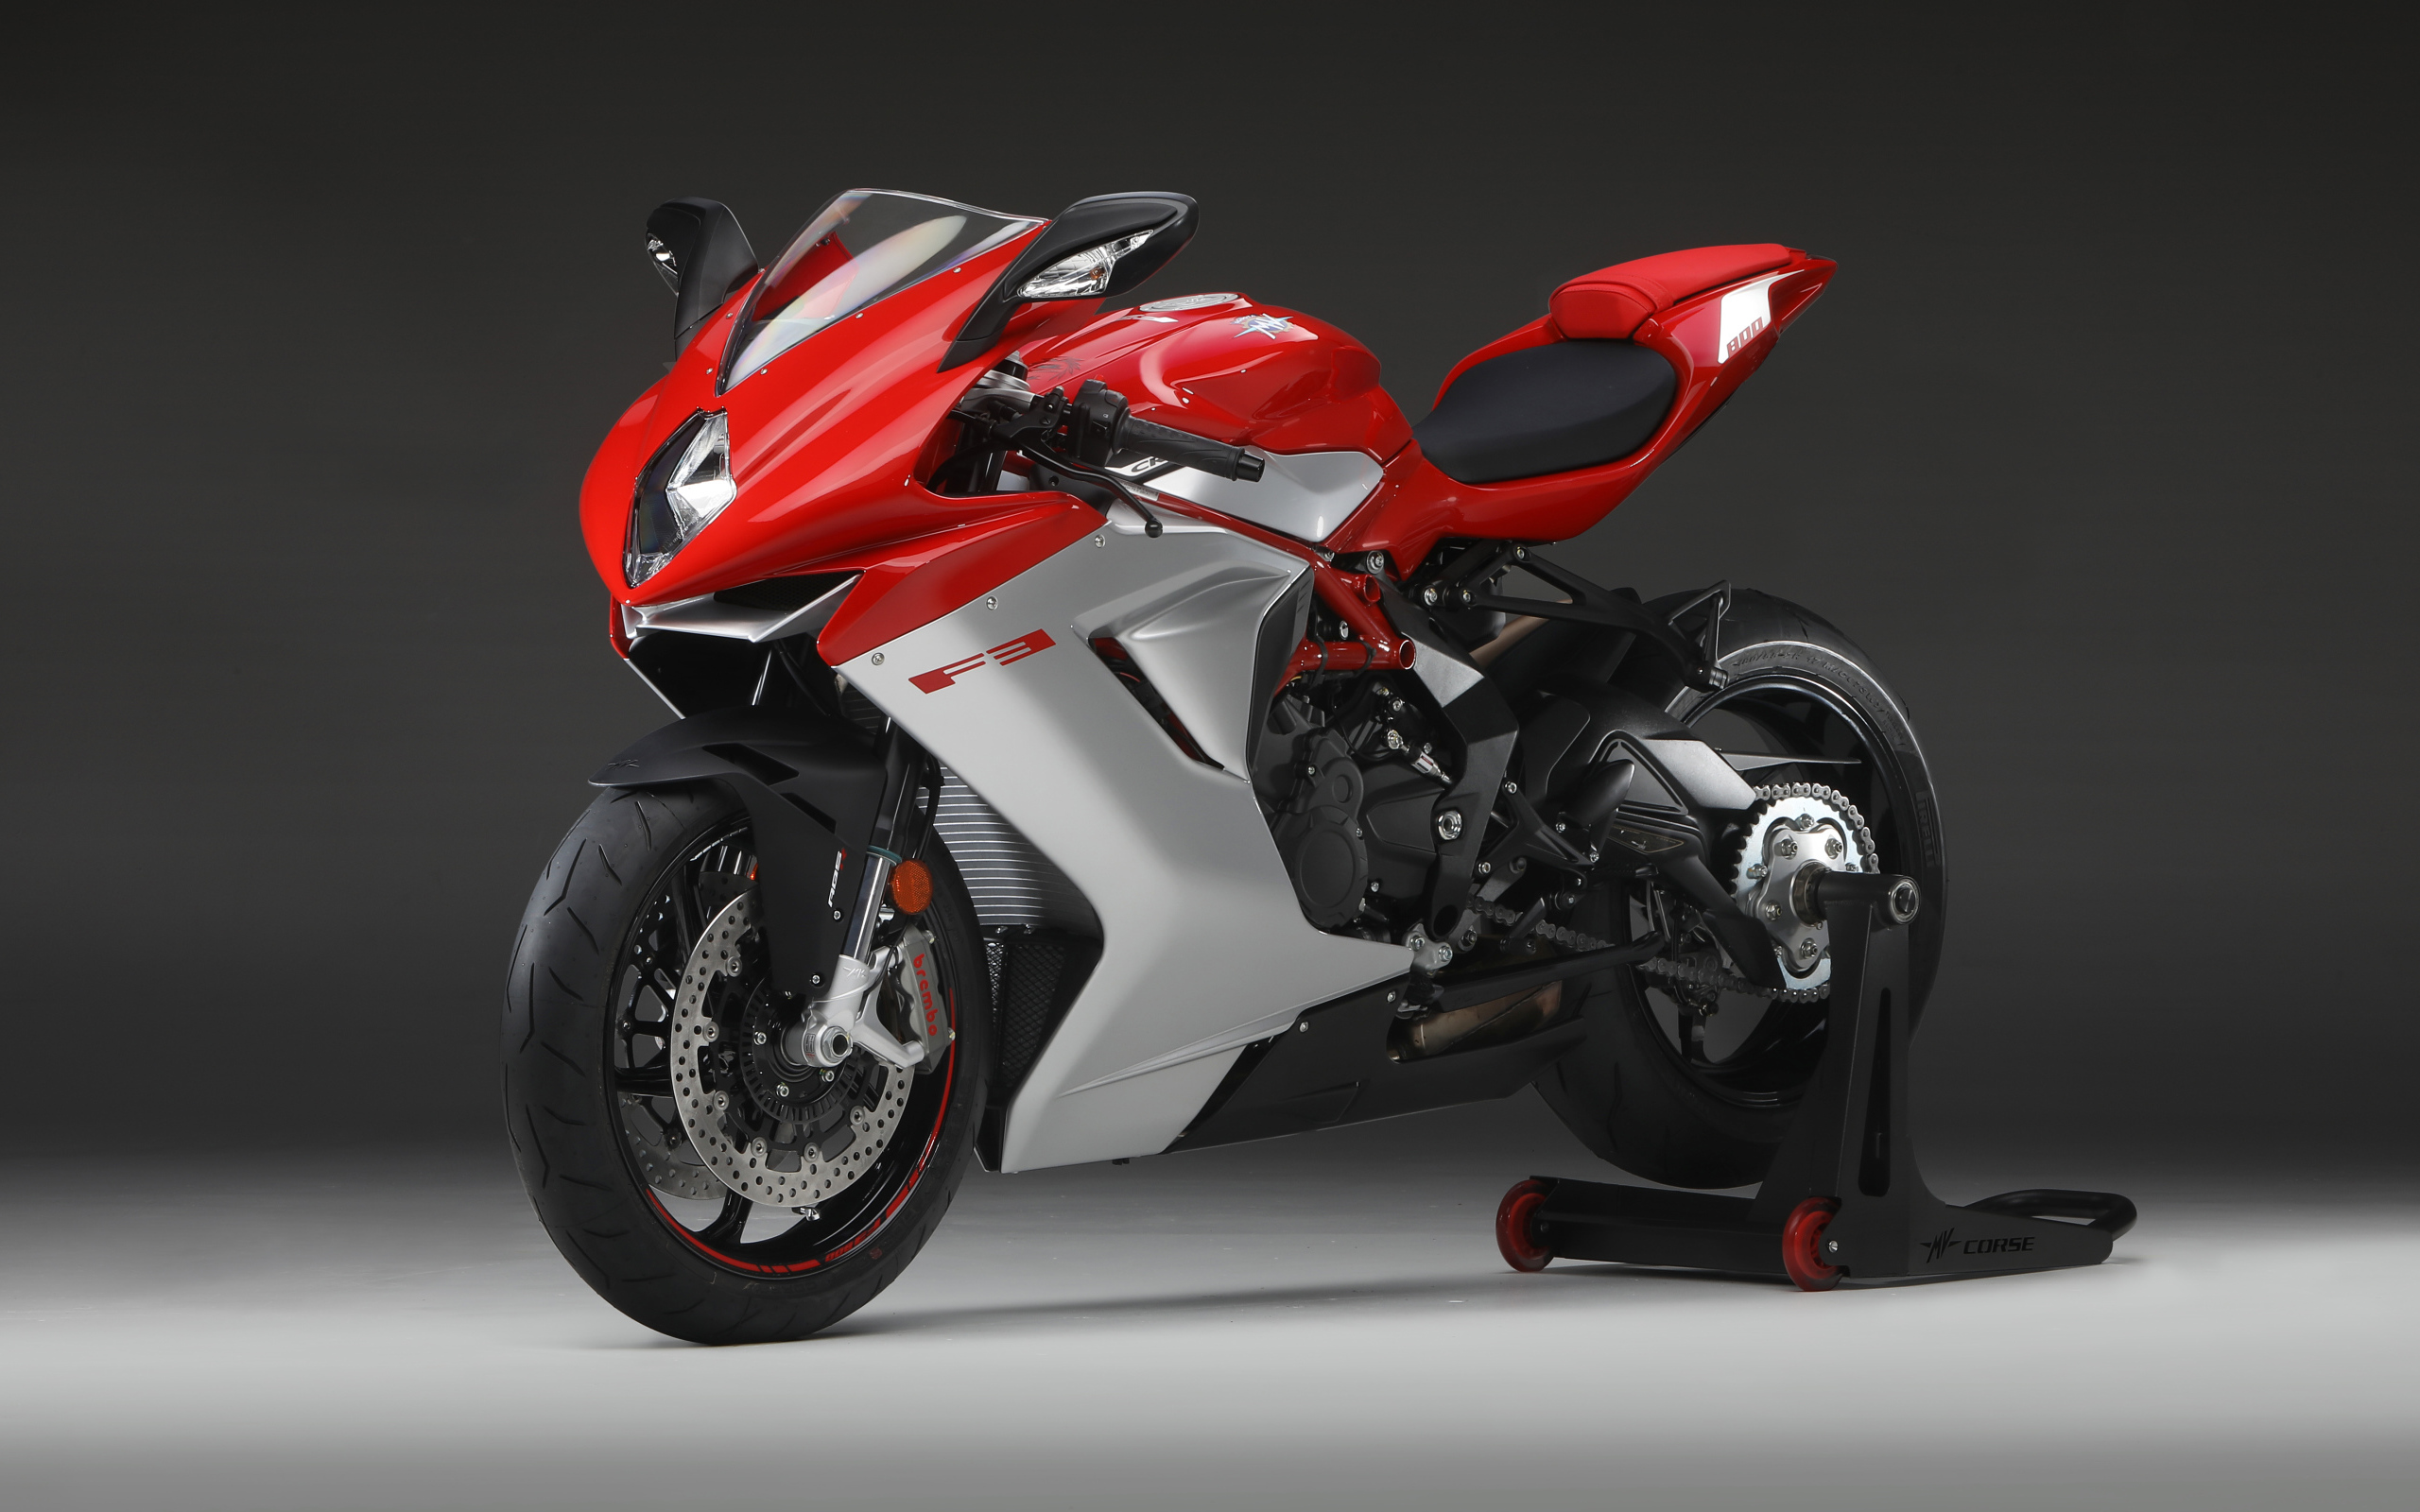 Red Agusta F3 800 2020 motorcycle on a gray background